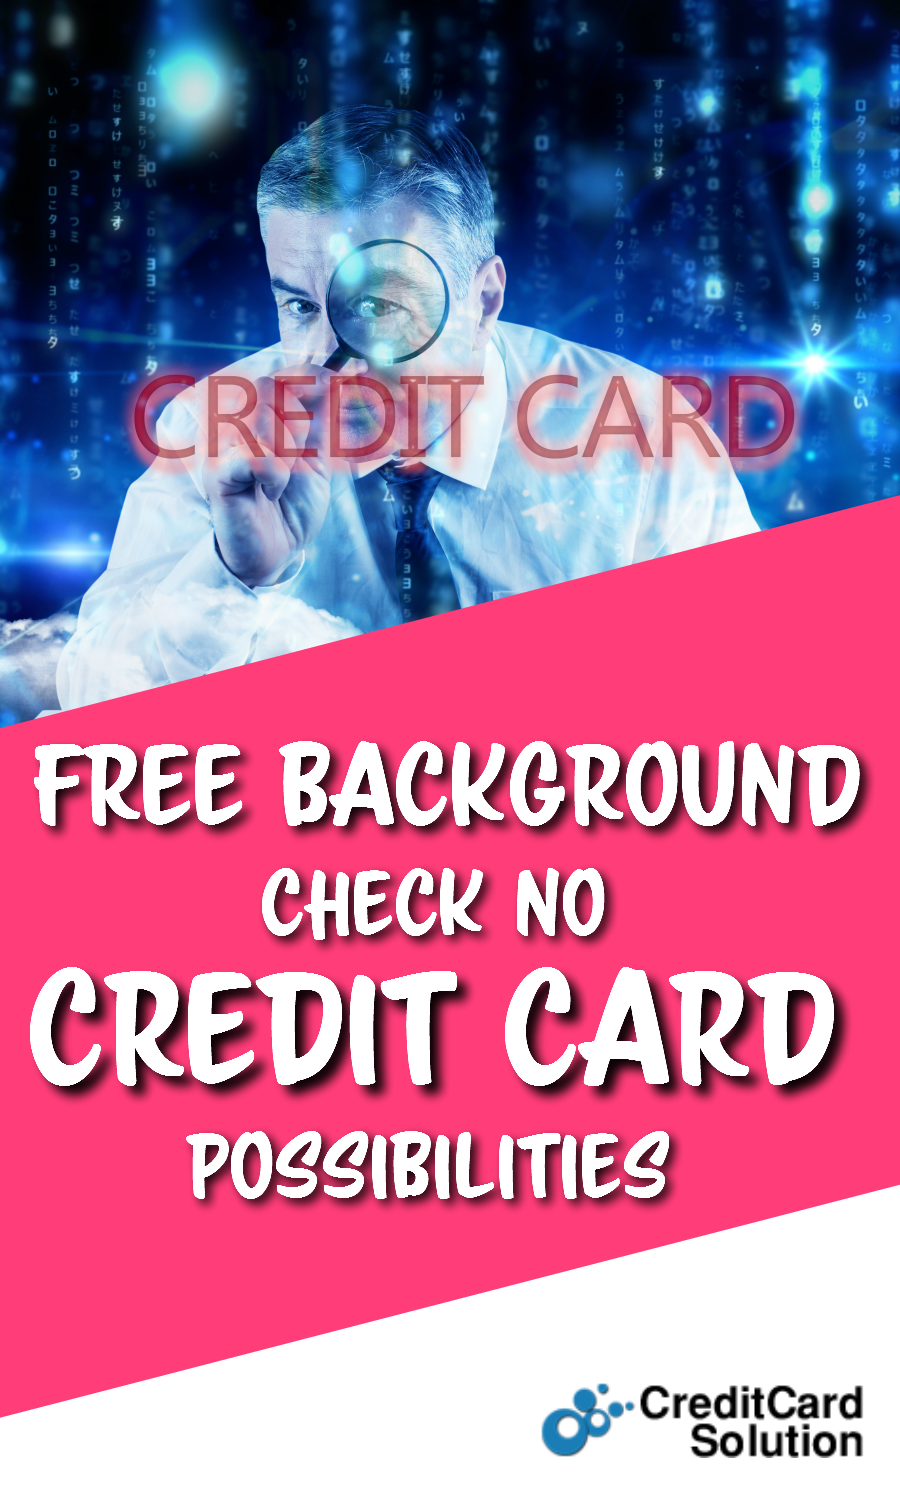 Free Background Check No Credit Card Possibilities